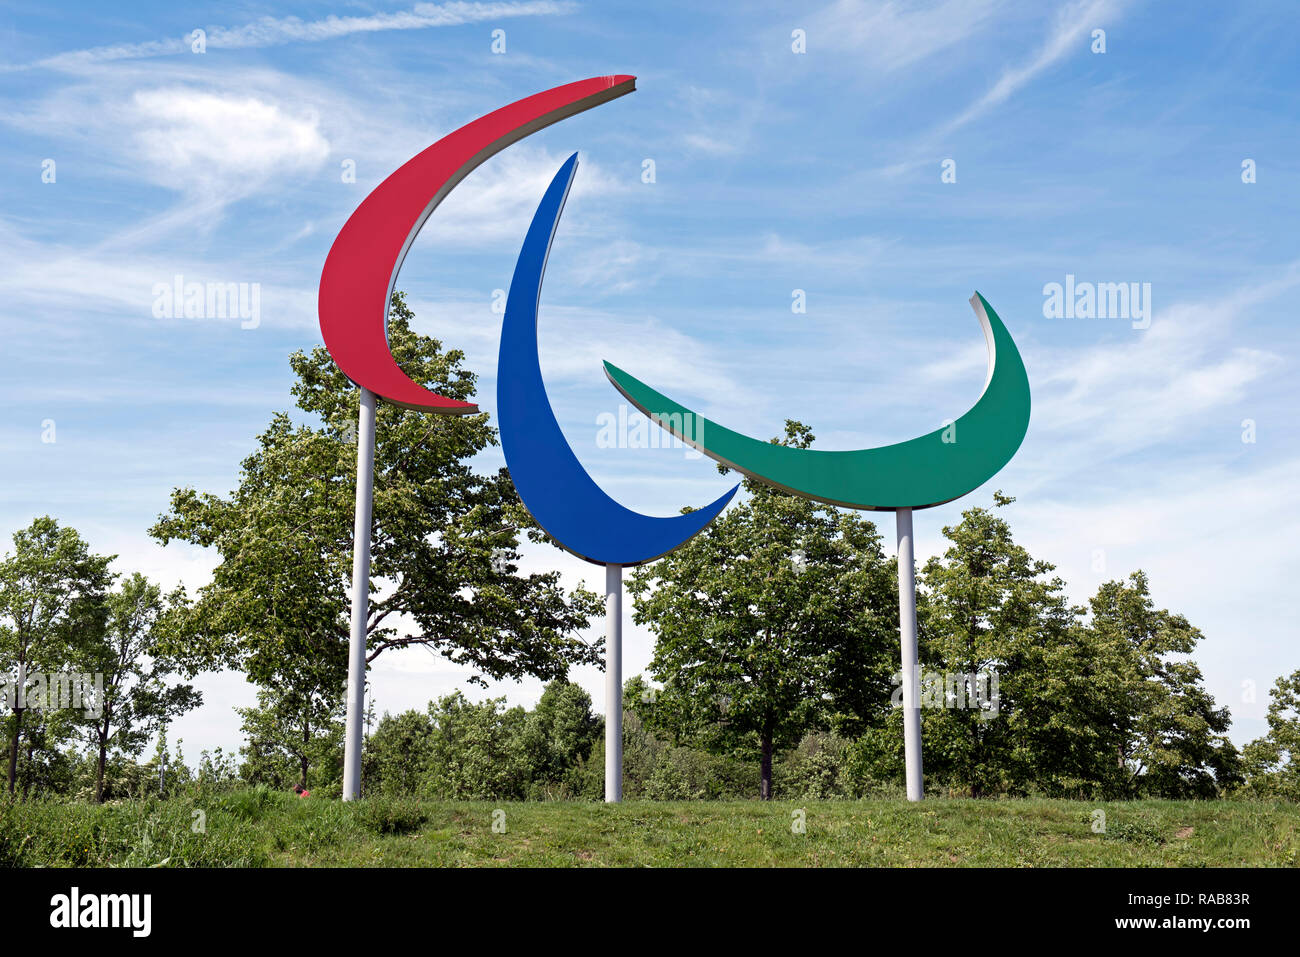 Paralympic Games Symbol Queen Elizabeth Olympic Park, London England Britain UK Stock Photo